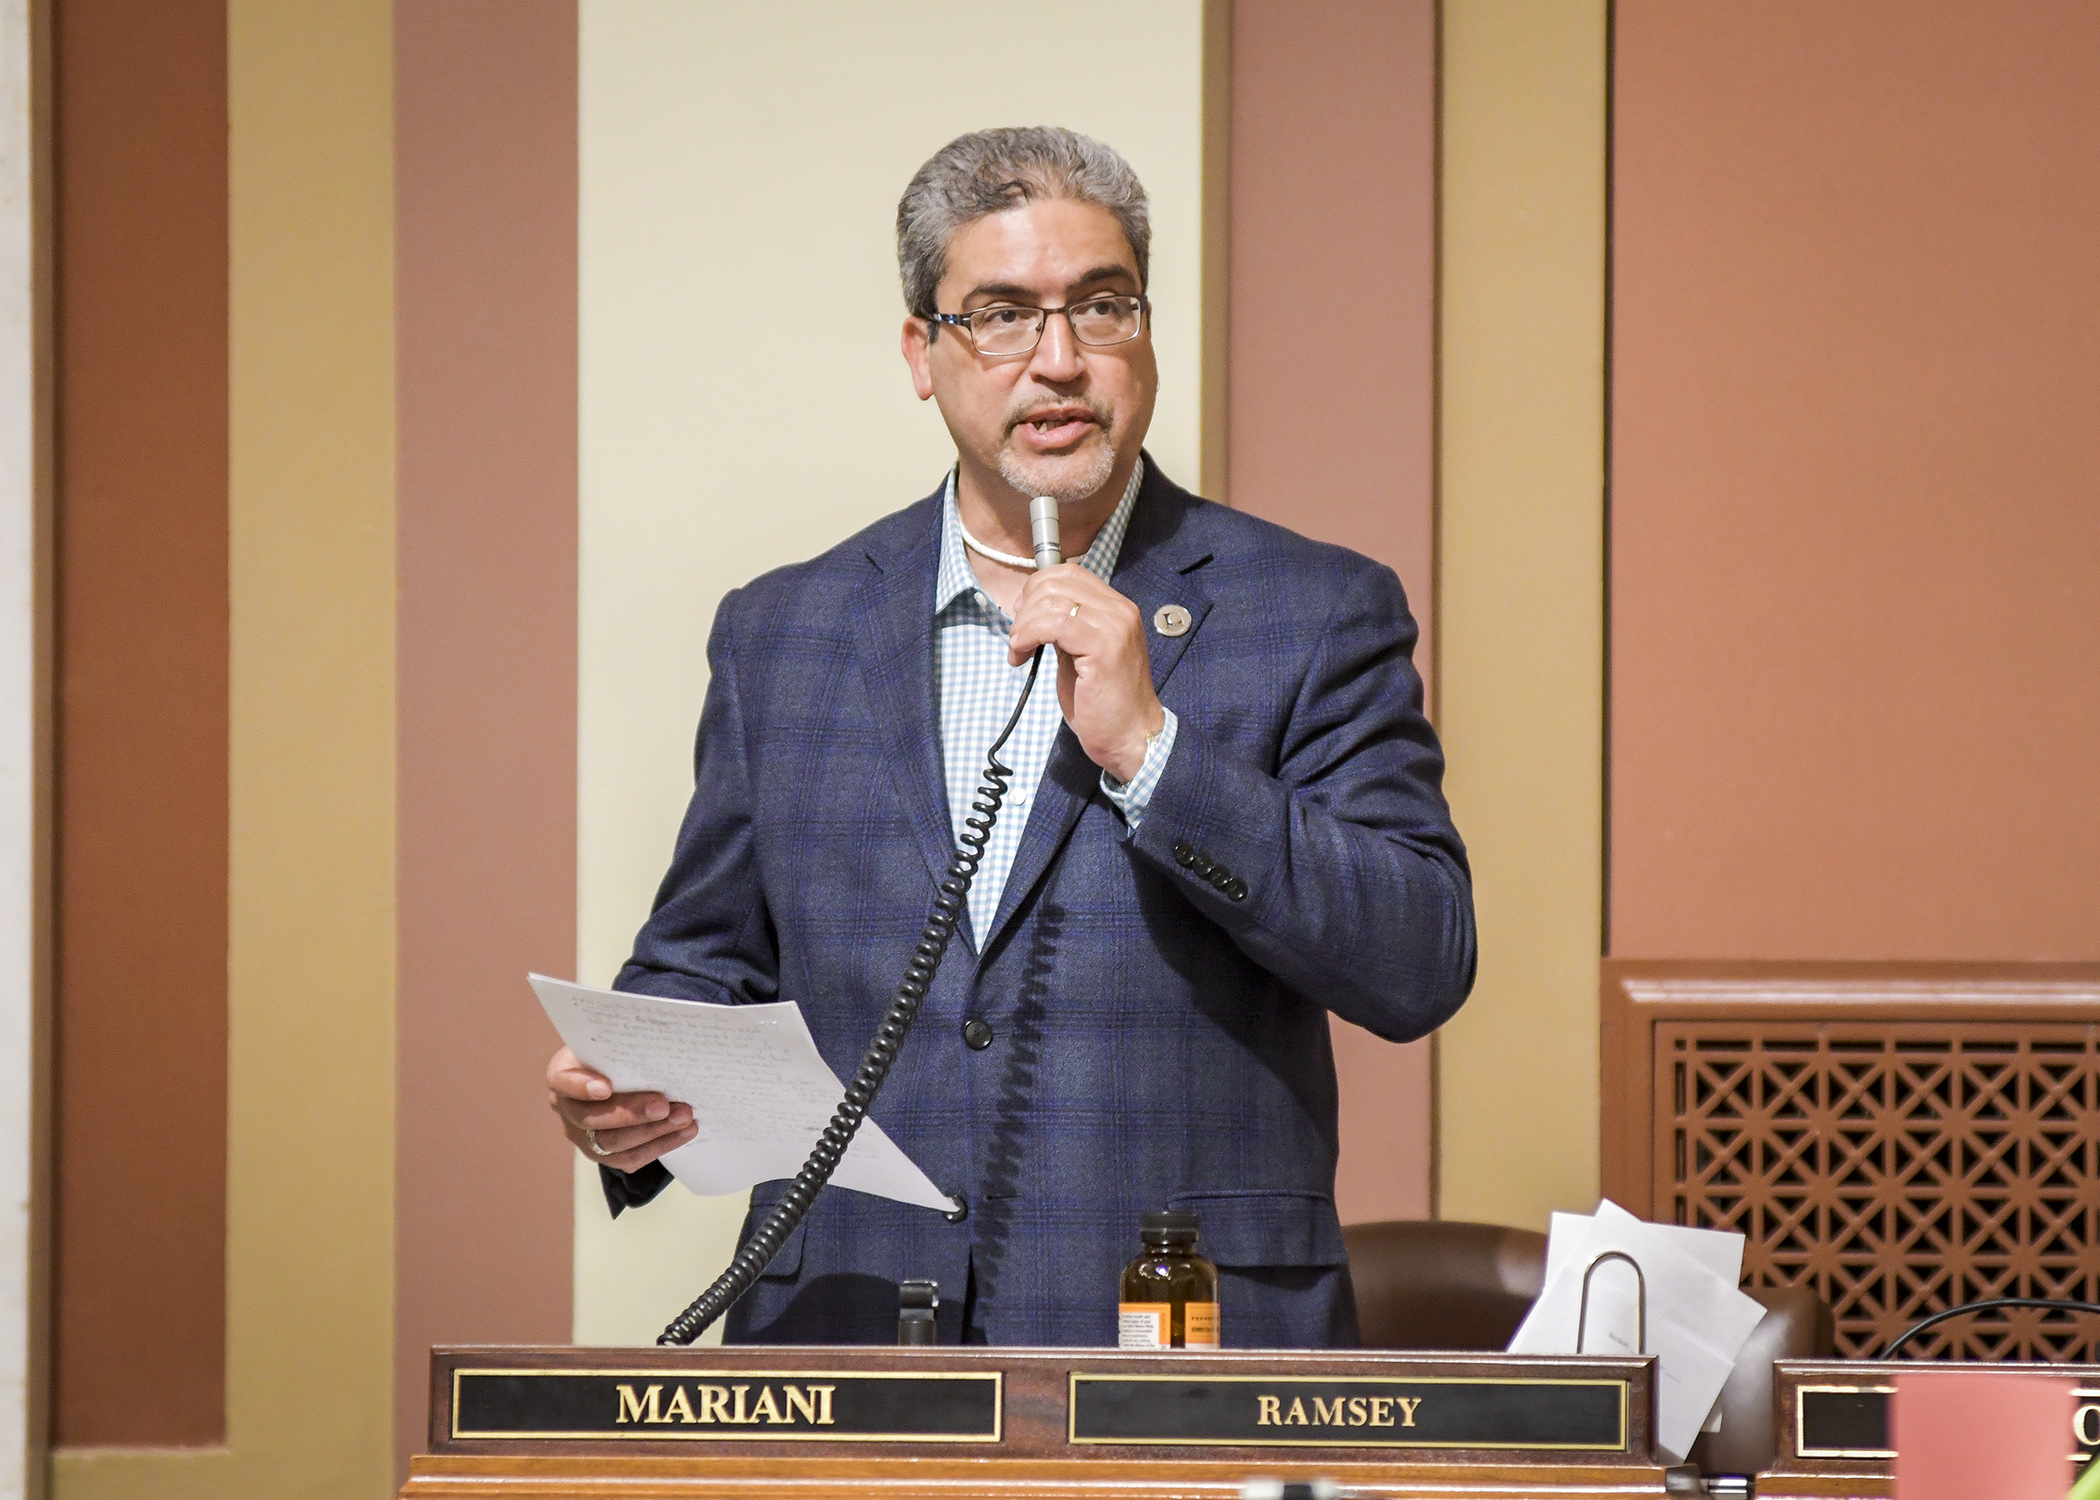 Rep. Carlos Mariani (DFL-St. Paul) speaks on the House Floor in 2019 during debate on the omnibus public safety bill. Mariani announced Jan. 13 he will not seek a 17th term in the Minnesota House. (House Photography file photo)